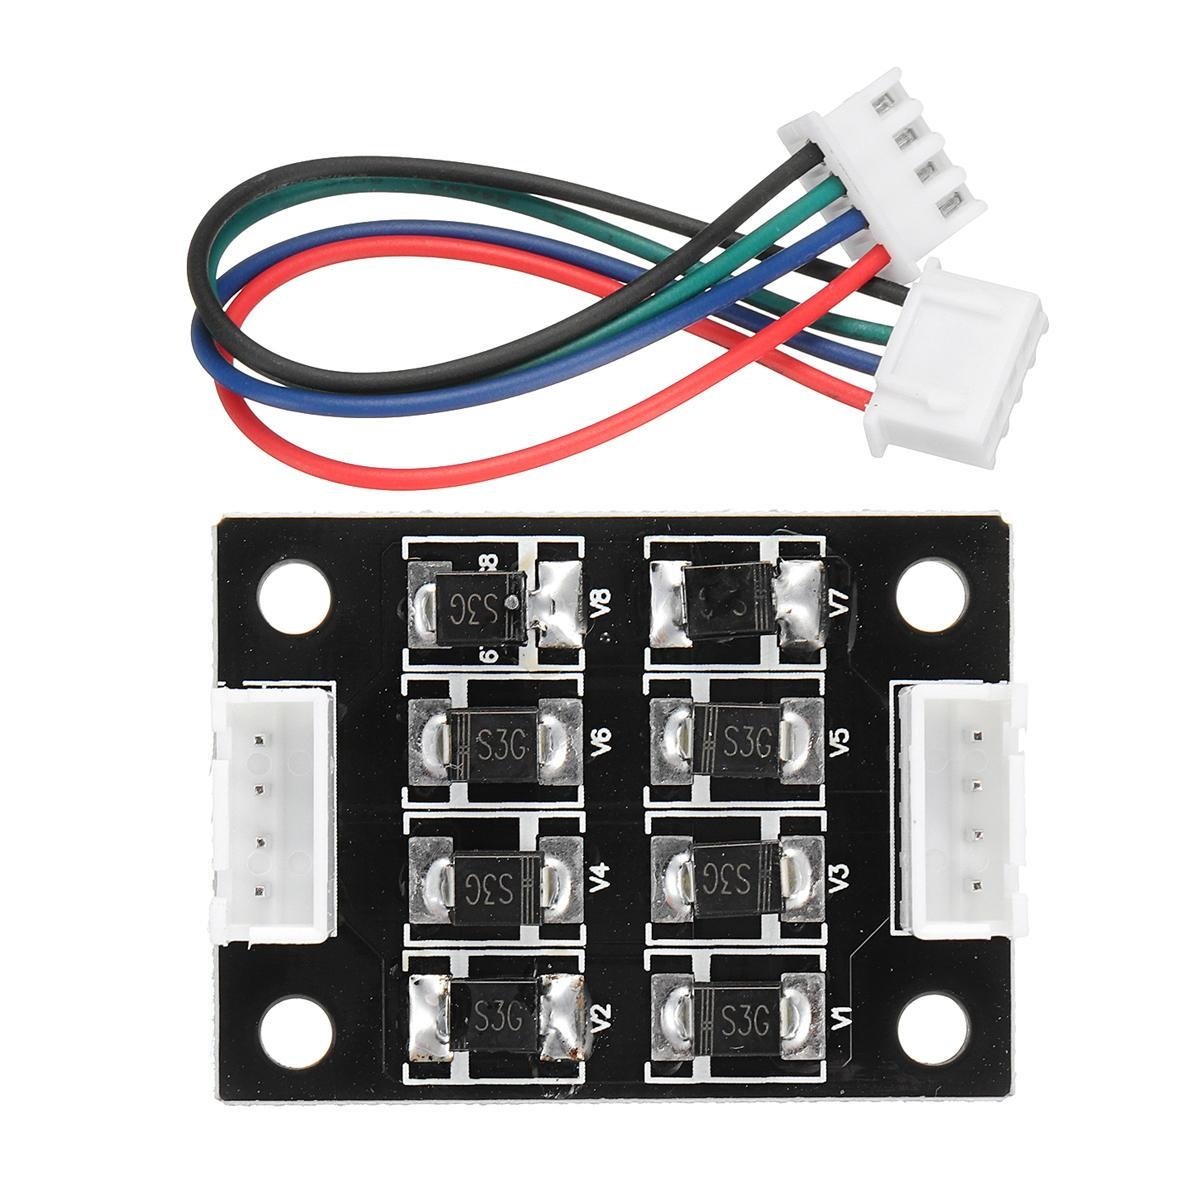 TL-Smoother Addon Module With Dupont Line For 3D Printer Stepper Motor